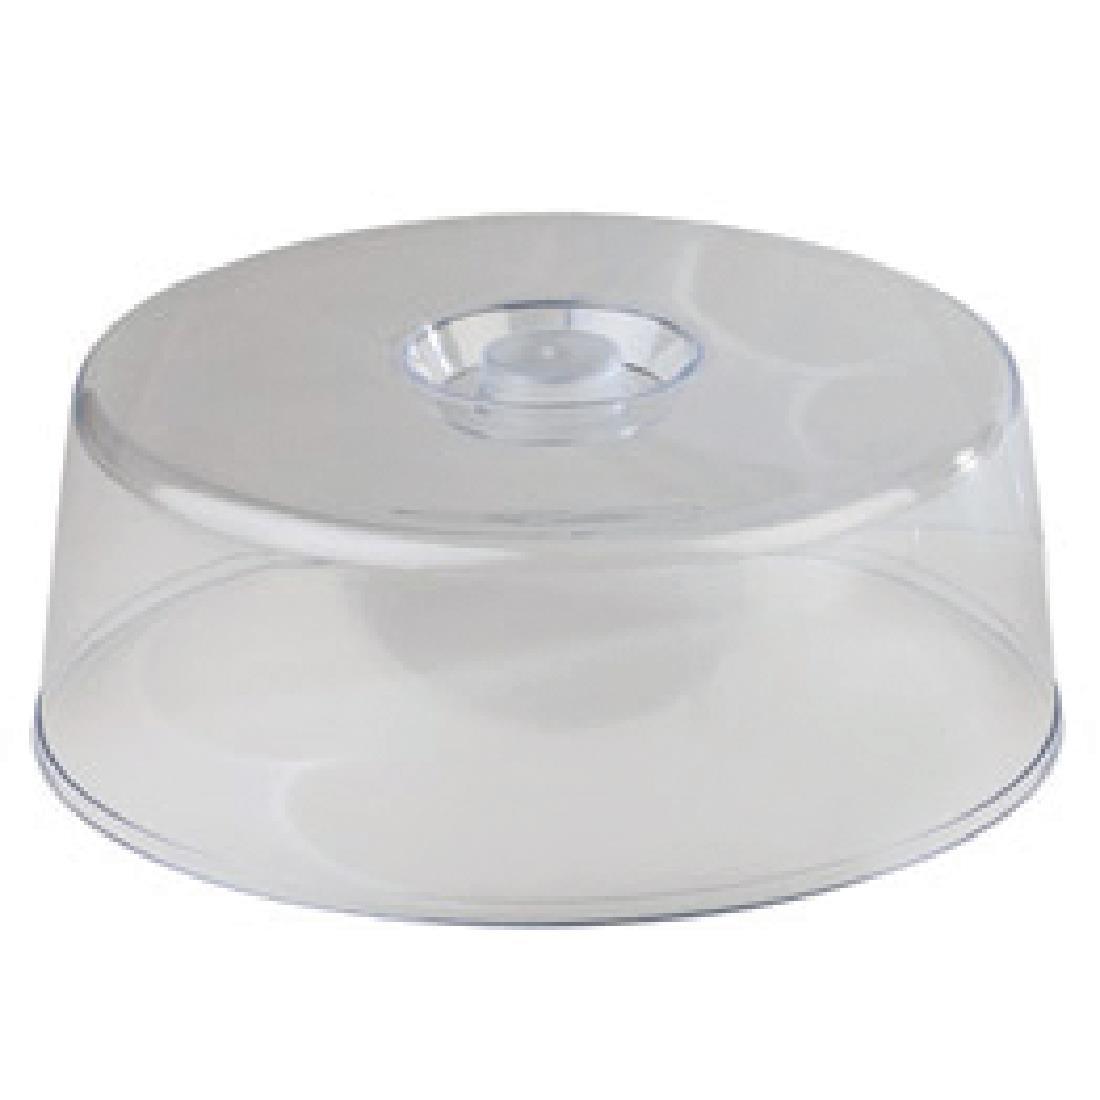 APS Lid for Rotating Lazy Susan Cake Stand - U263  - 1